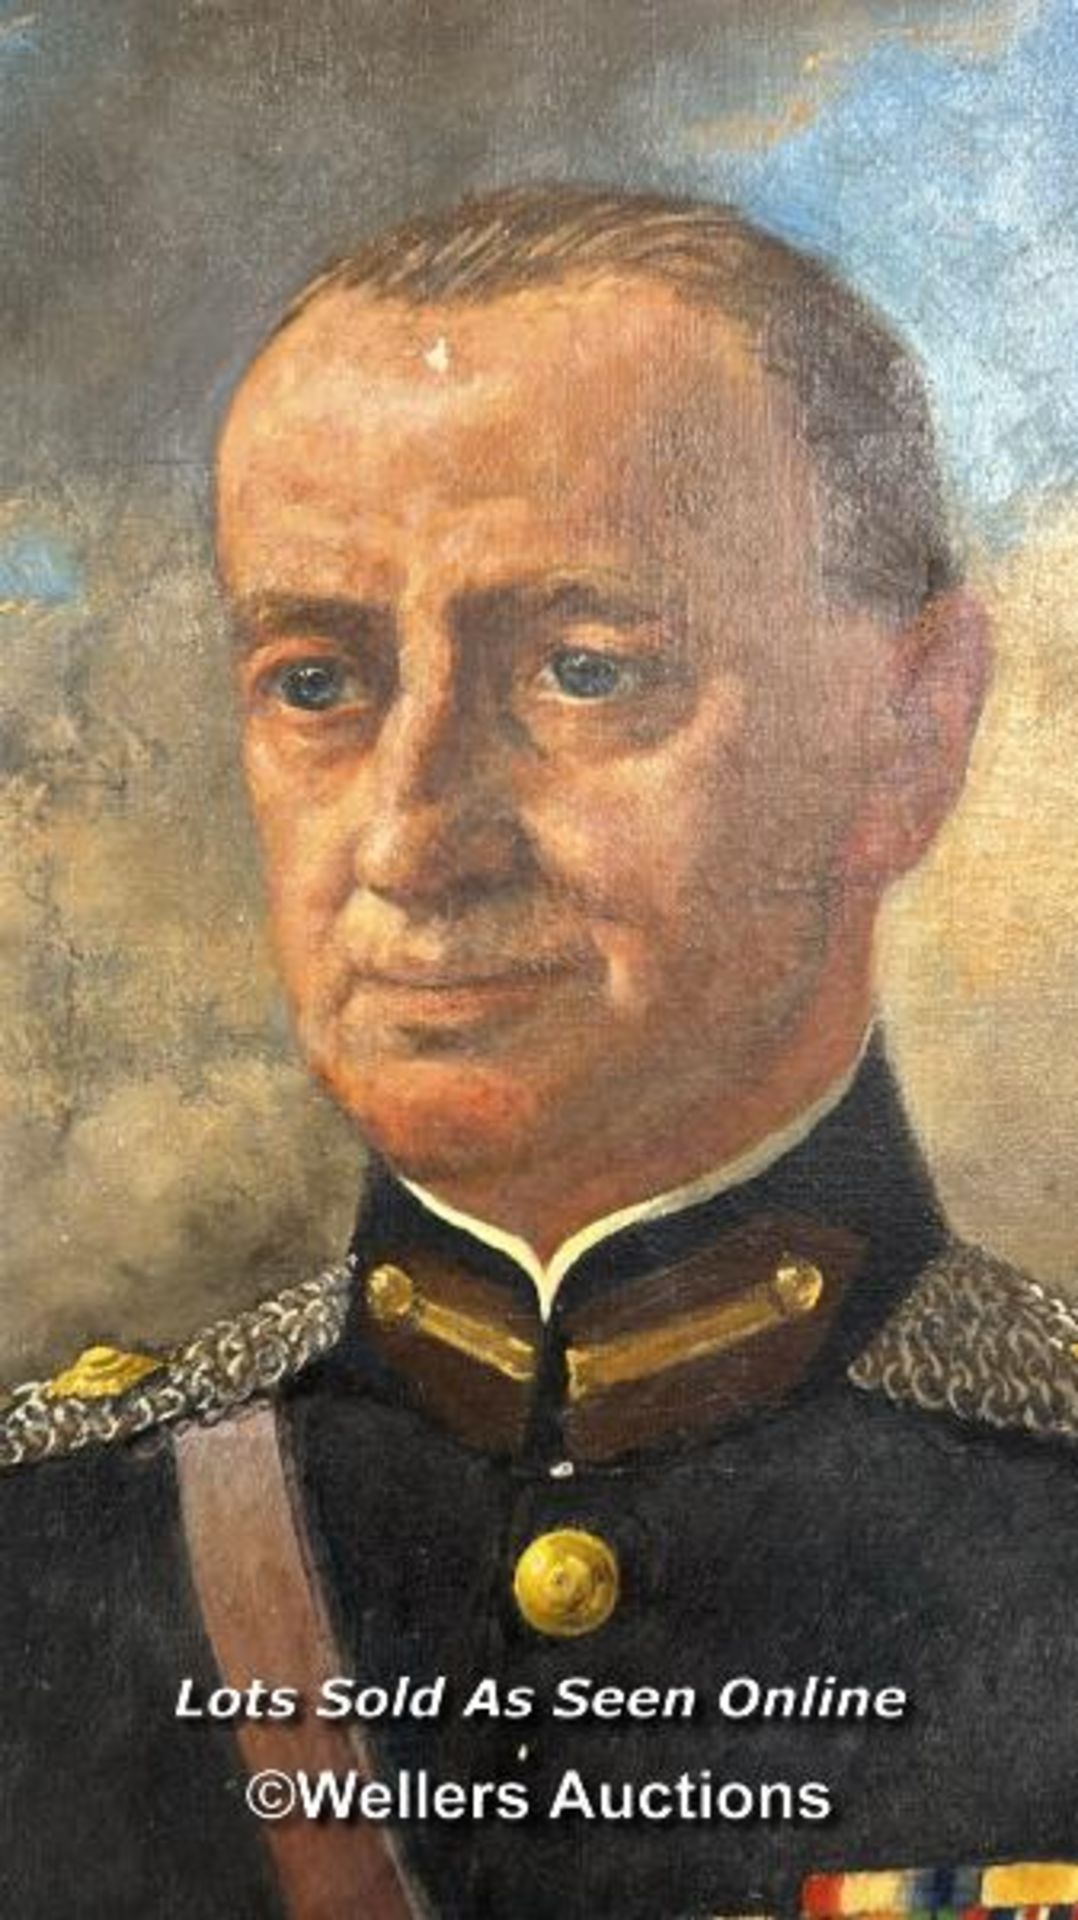 OIL ON CANVAS DEPICTING A PORTRAIT OF L. BUSTLELL-RAWLINGS, IN THE UNIFORM OF THE LEGION OF - Image 2 of 10